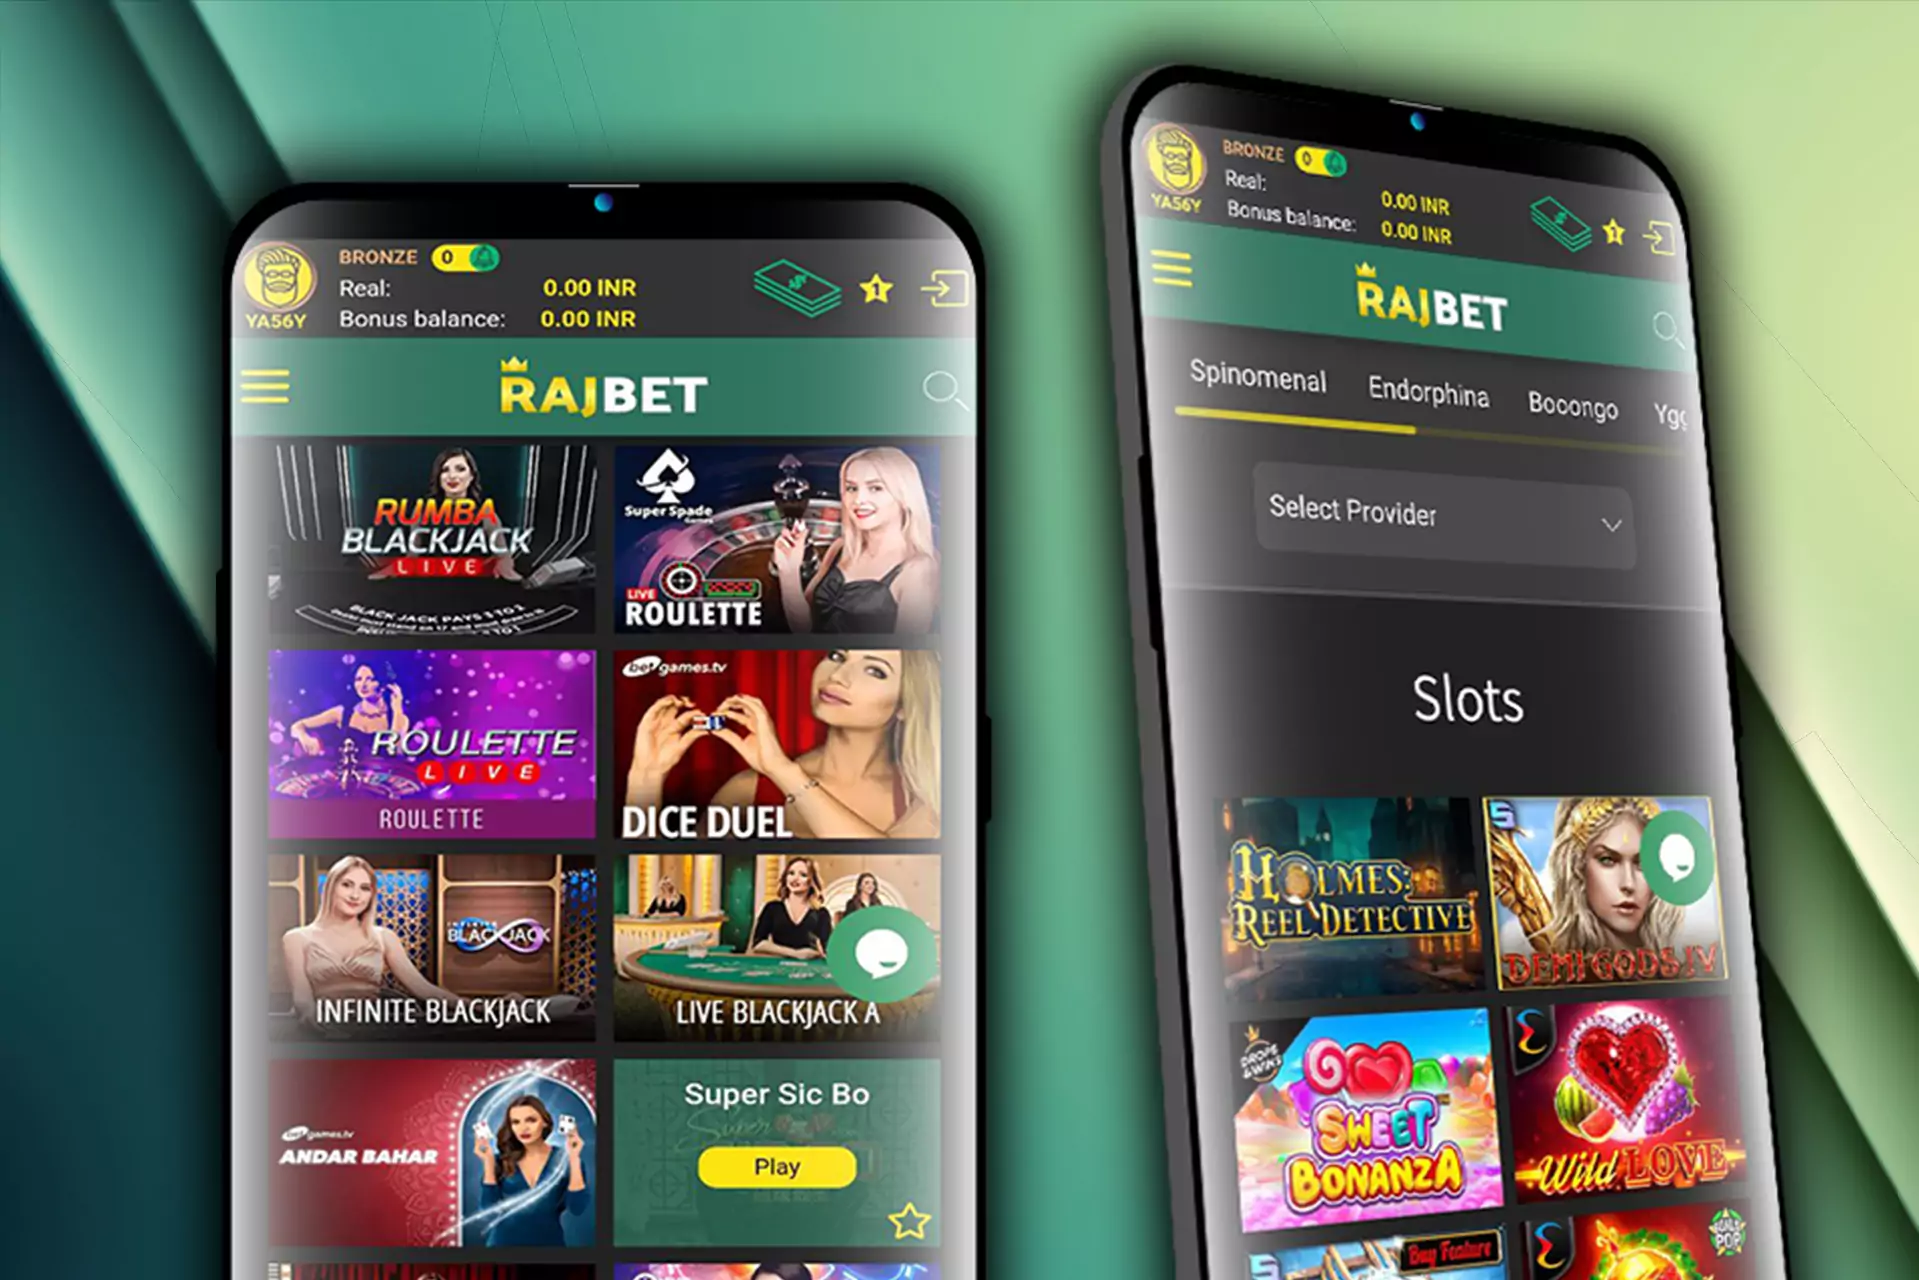 There are many casino games available in the Rajbet app.